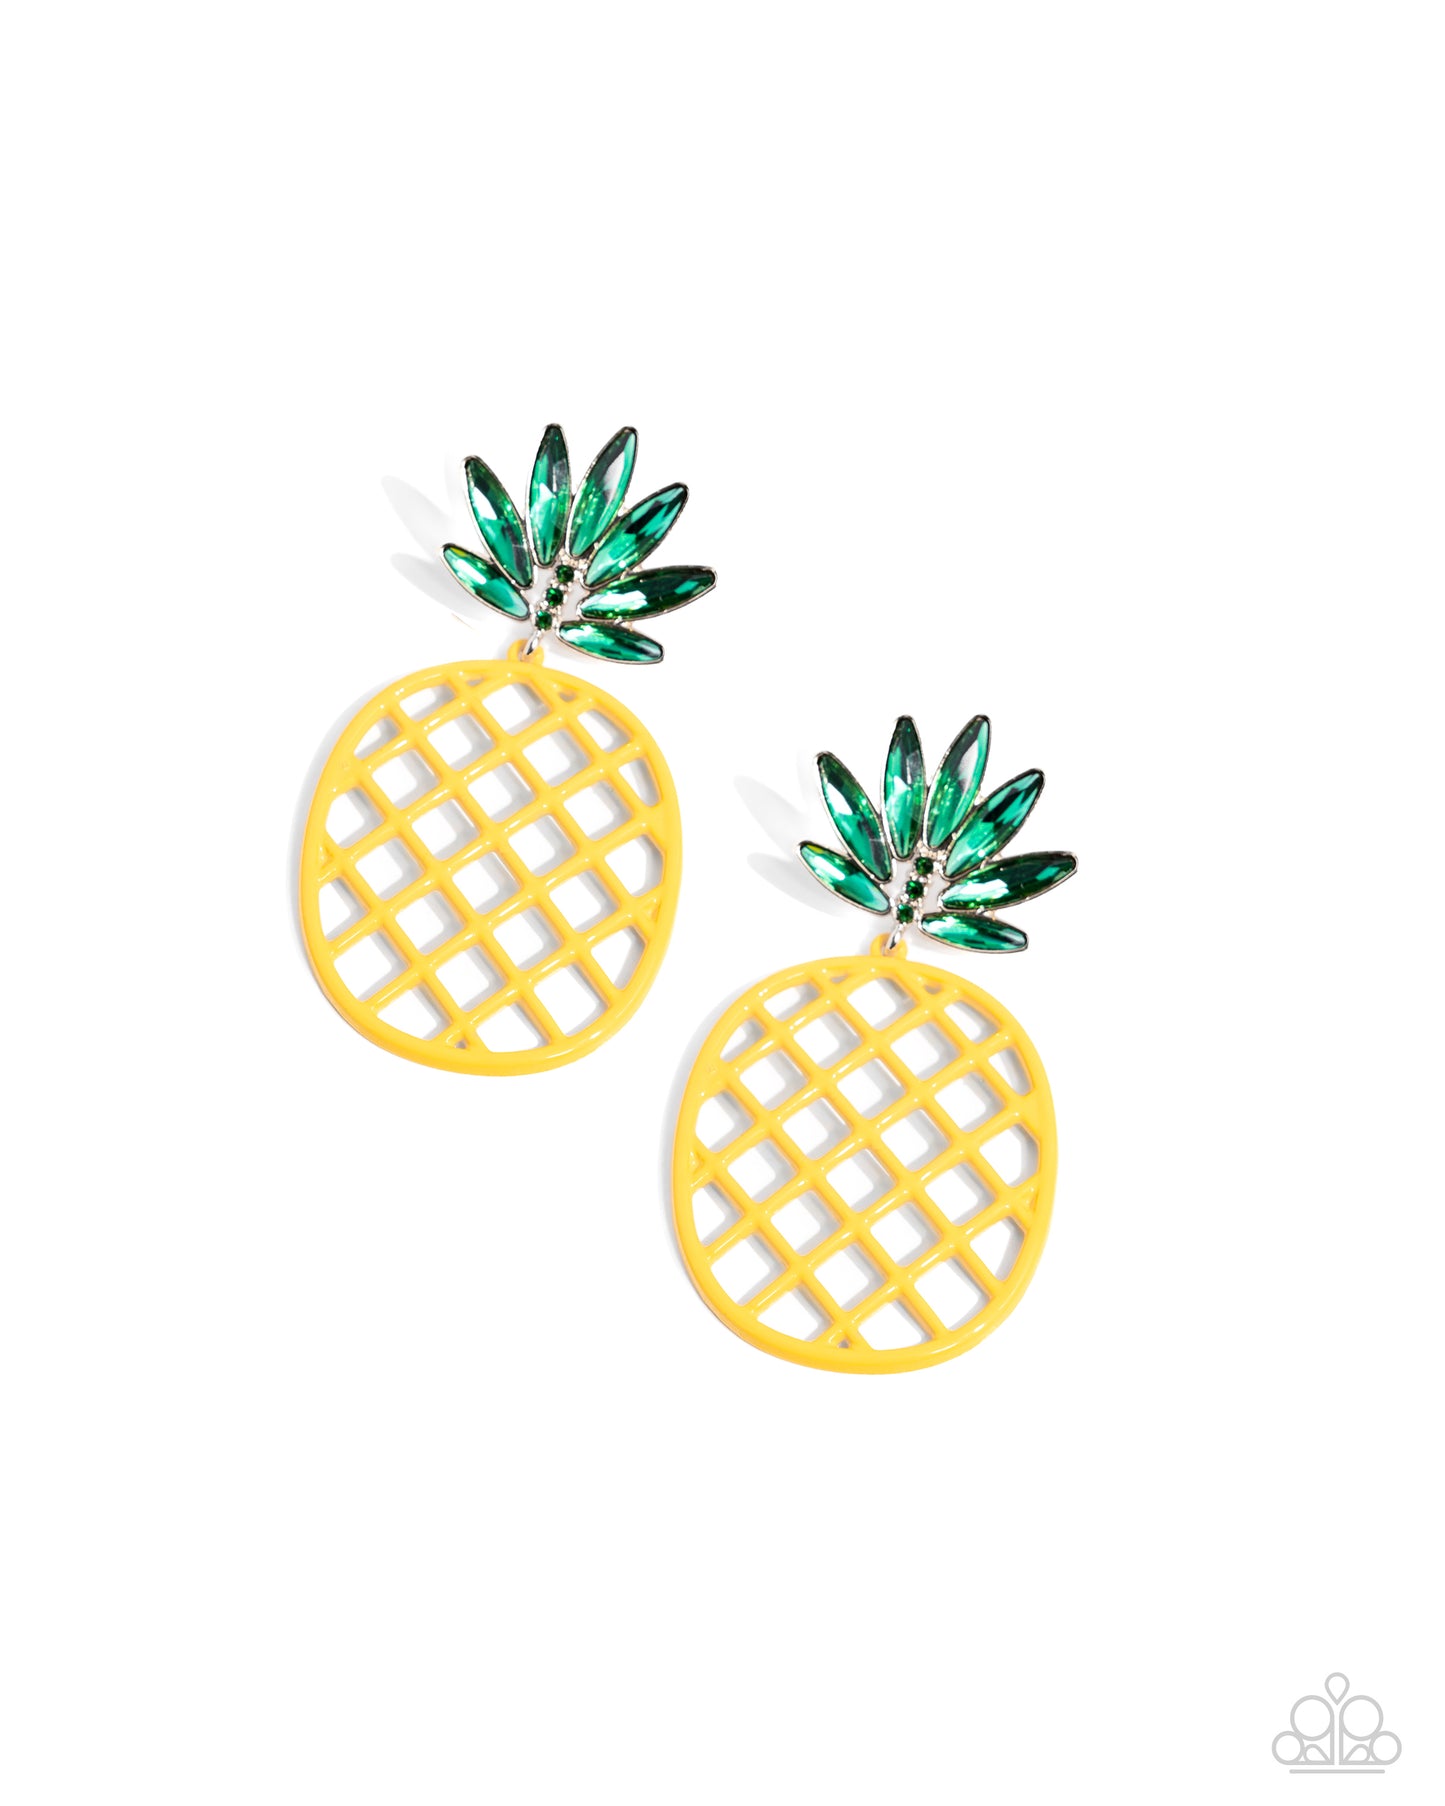 <p>Pressed in gold frames, a collection of green elongated oval gems fan out around the ear from a trio of three dainty green rhinestones. The green bejeweled array gives way to a yellow airy frame, resembling an oversized pineapple for a fruity finish. Earring attaches to a standard post fitting.</p> <p><i> Sold as one pair of post earrings.</i></p>